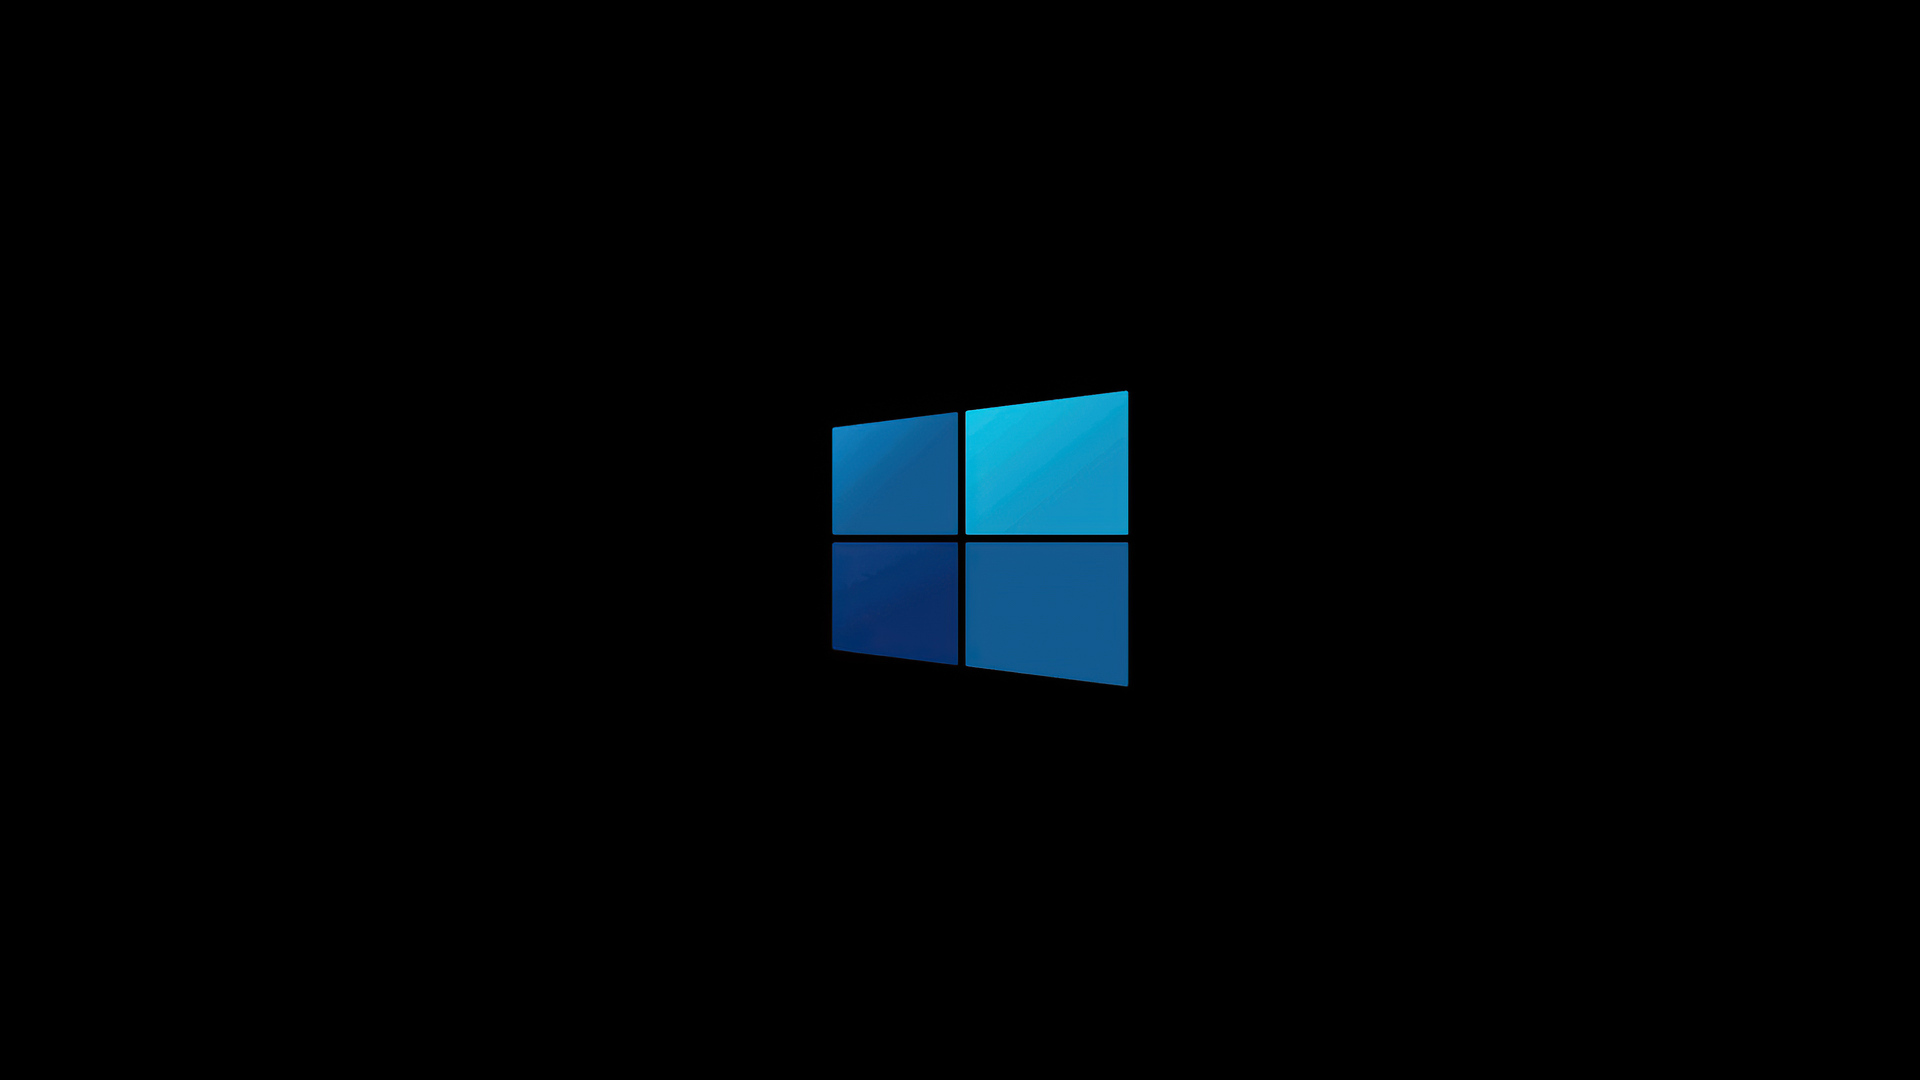 1920x1080 Windows 10 Minimal Logo 4k Laptop Full HD 1080P HD 4k Wallpapers,  Images, Backgrounds, Photos and Pictures